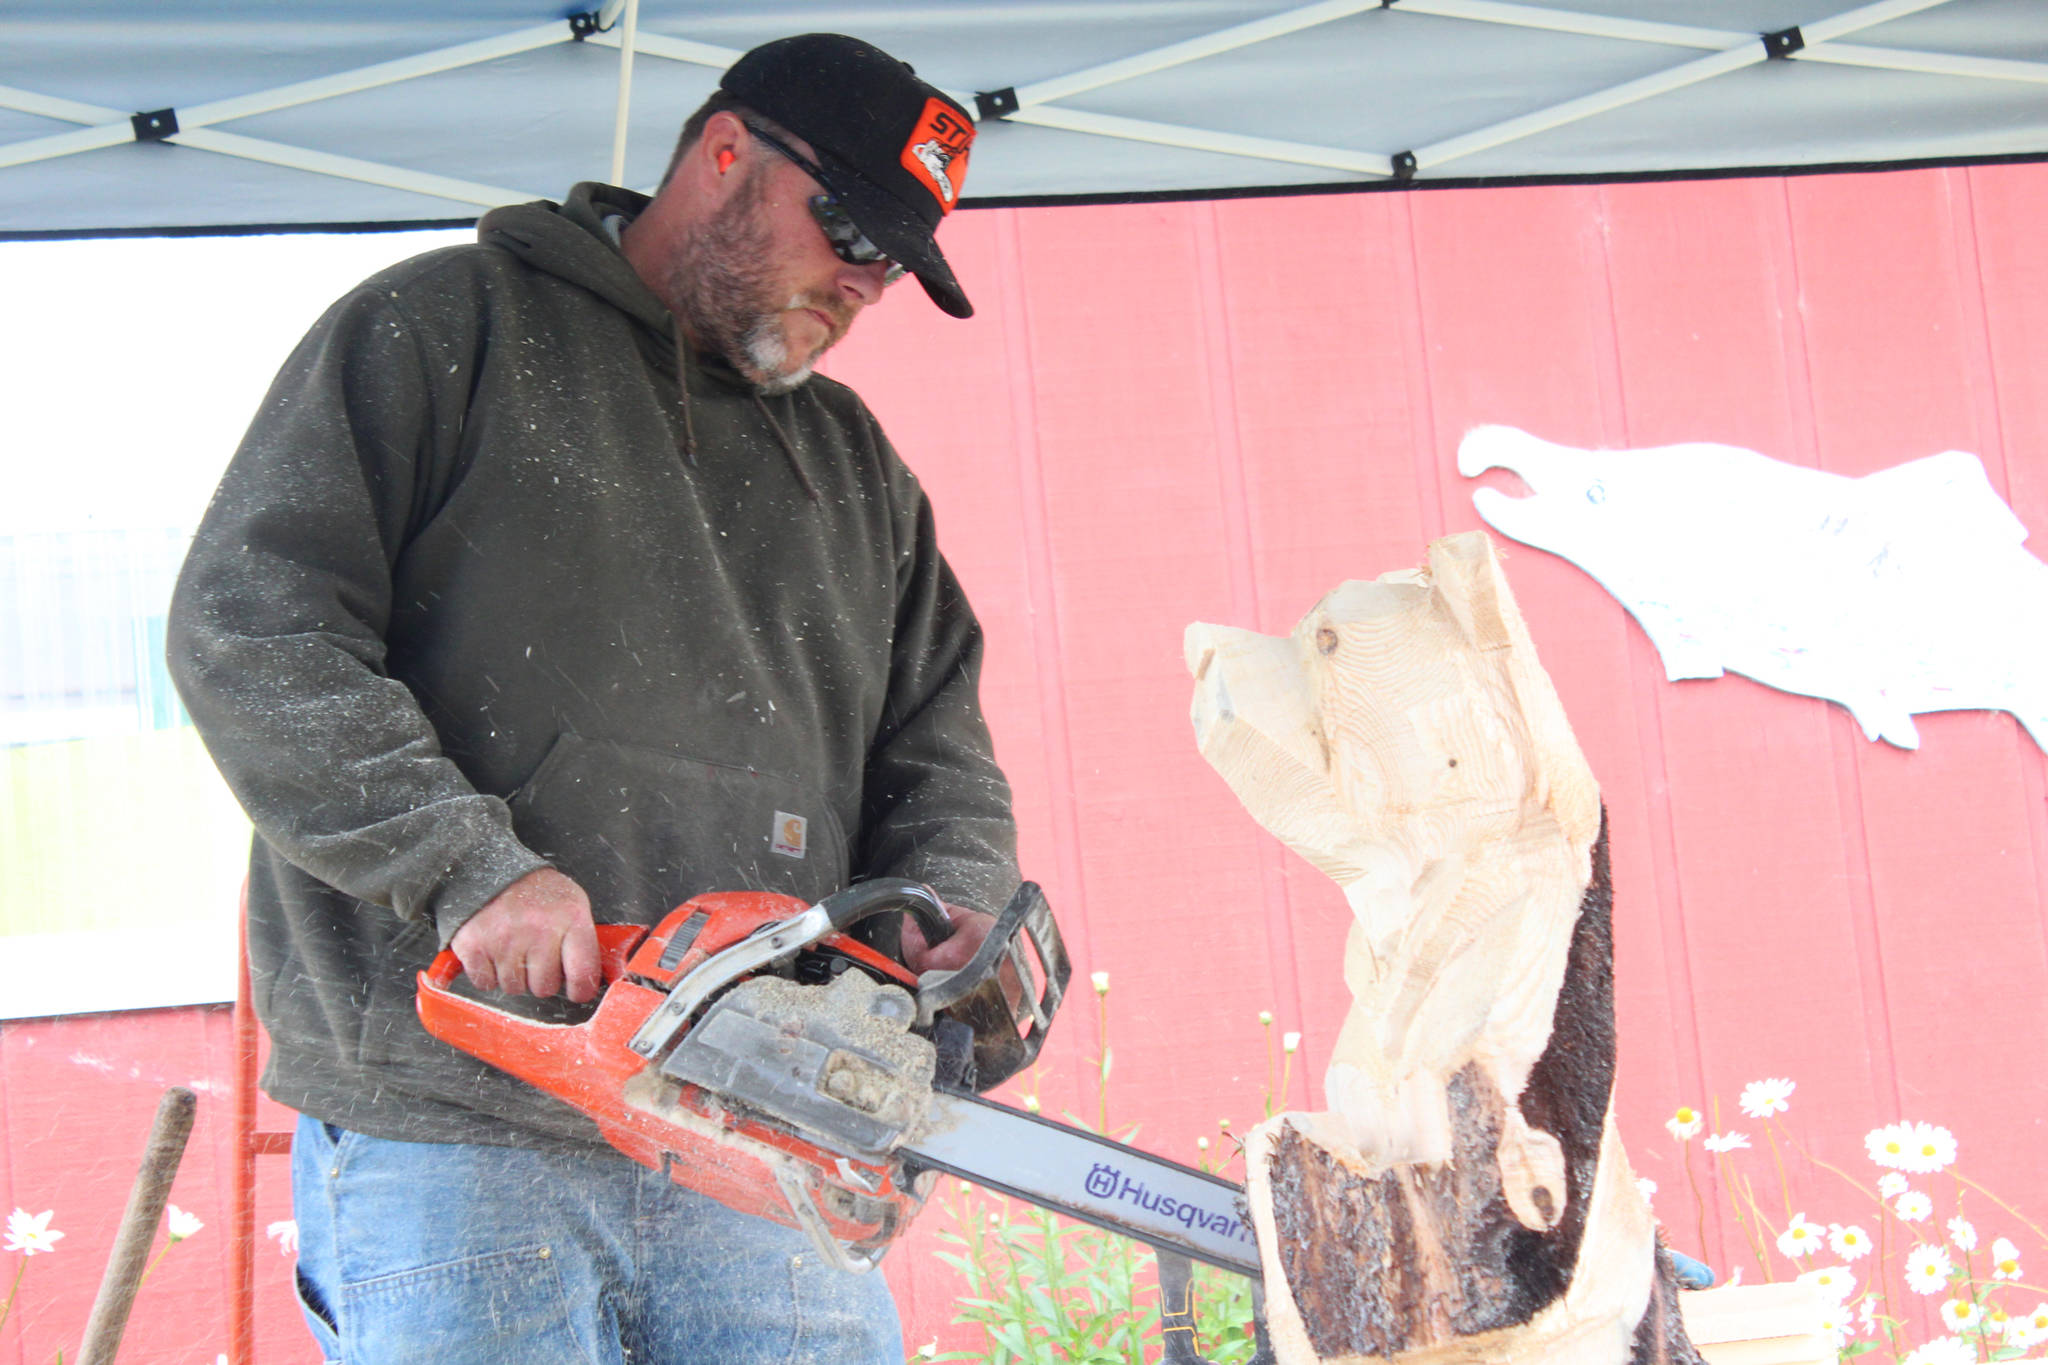 Guy Lane carves a bear statue while onlookers watch Friday, Aug. 18, 2017 at the Kenai Peninsula Fair in Ninilchik, Alaska. Lane works at Alaska Bear Factory LLC, owned by Kim Sangder, which just moved down from Sterling to Homer. (Photo by Megan Pacer/Homer News)